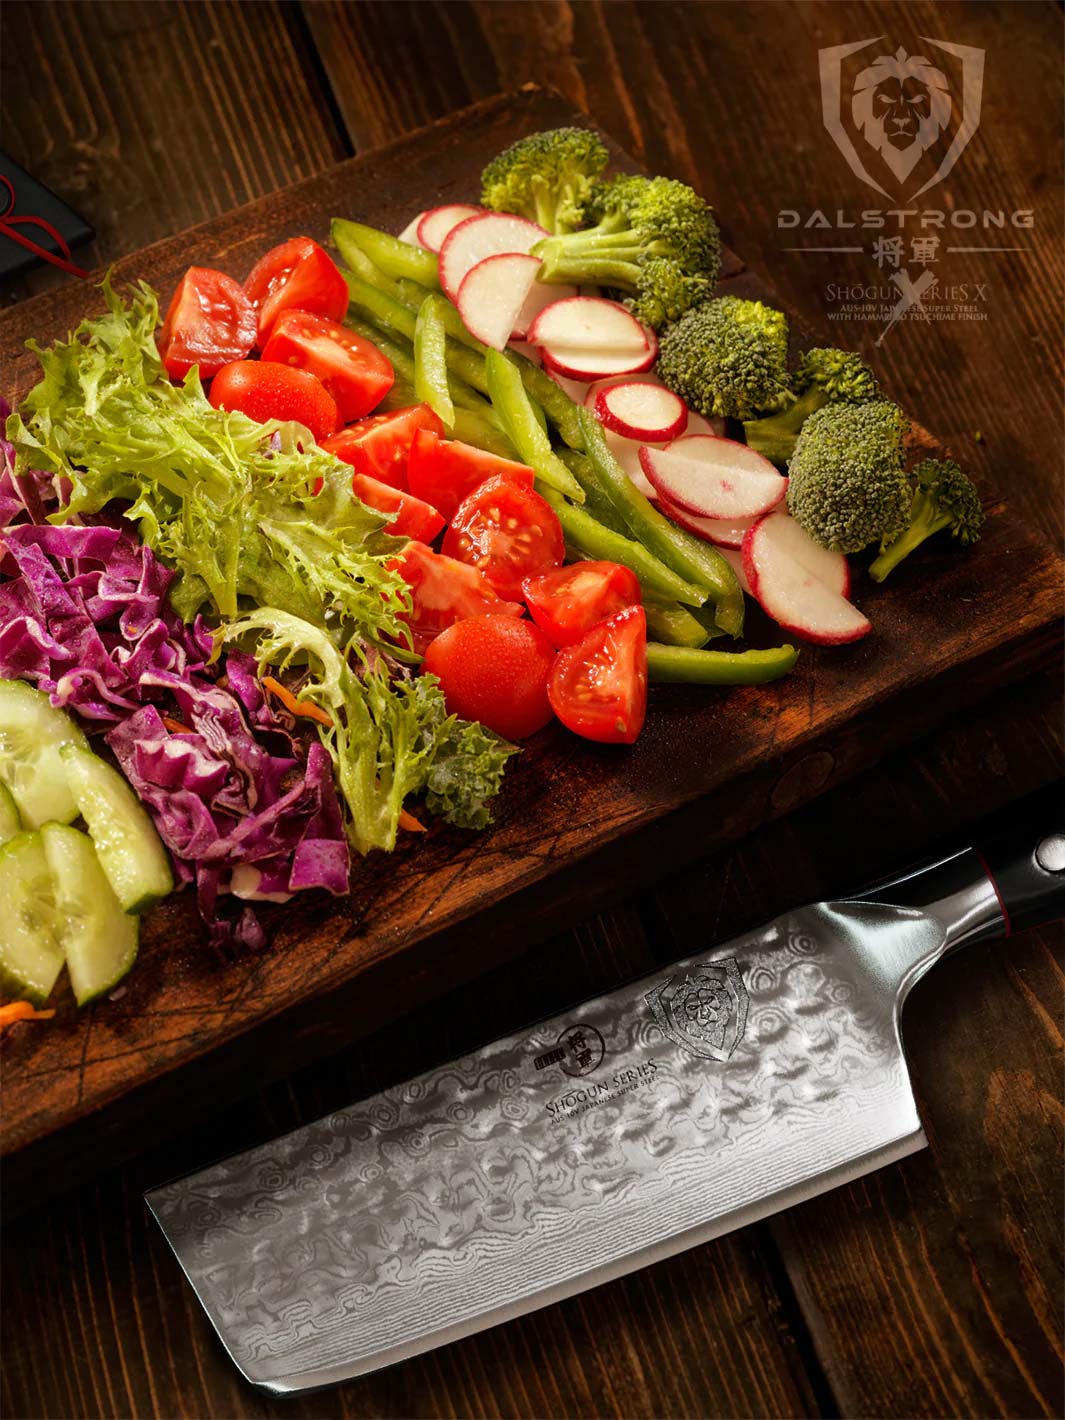 Dalstrong shogun series 6 inch nakiri knife with black handle and chopped vegetables on a wooden board.